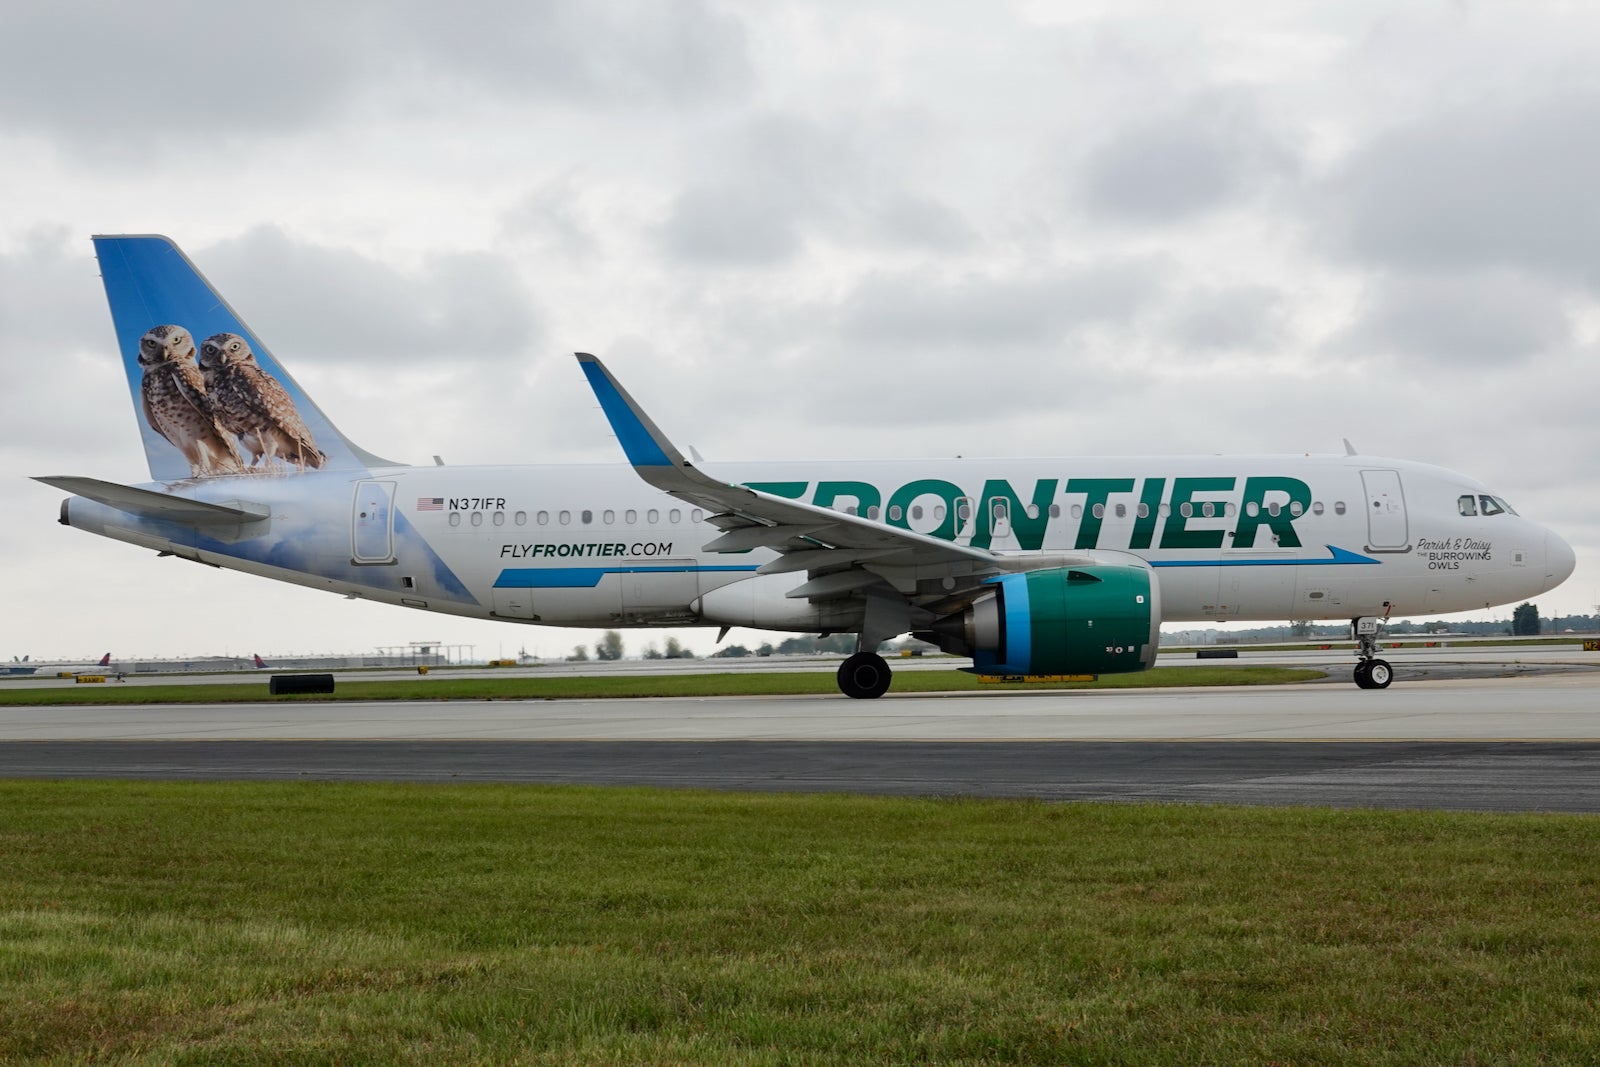 Deal alert: Frontier selling $19 one-way tickets today only - The Points Guy